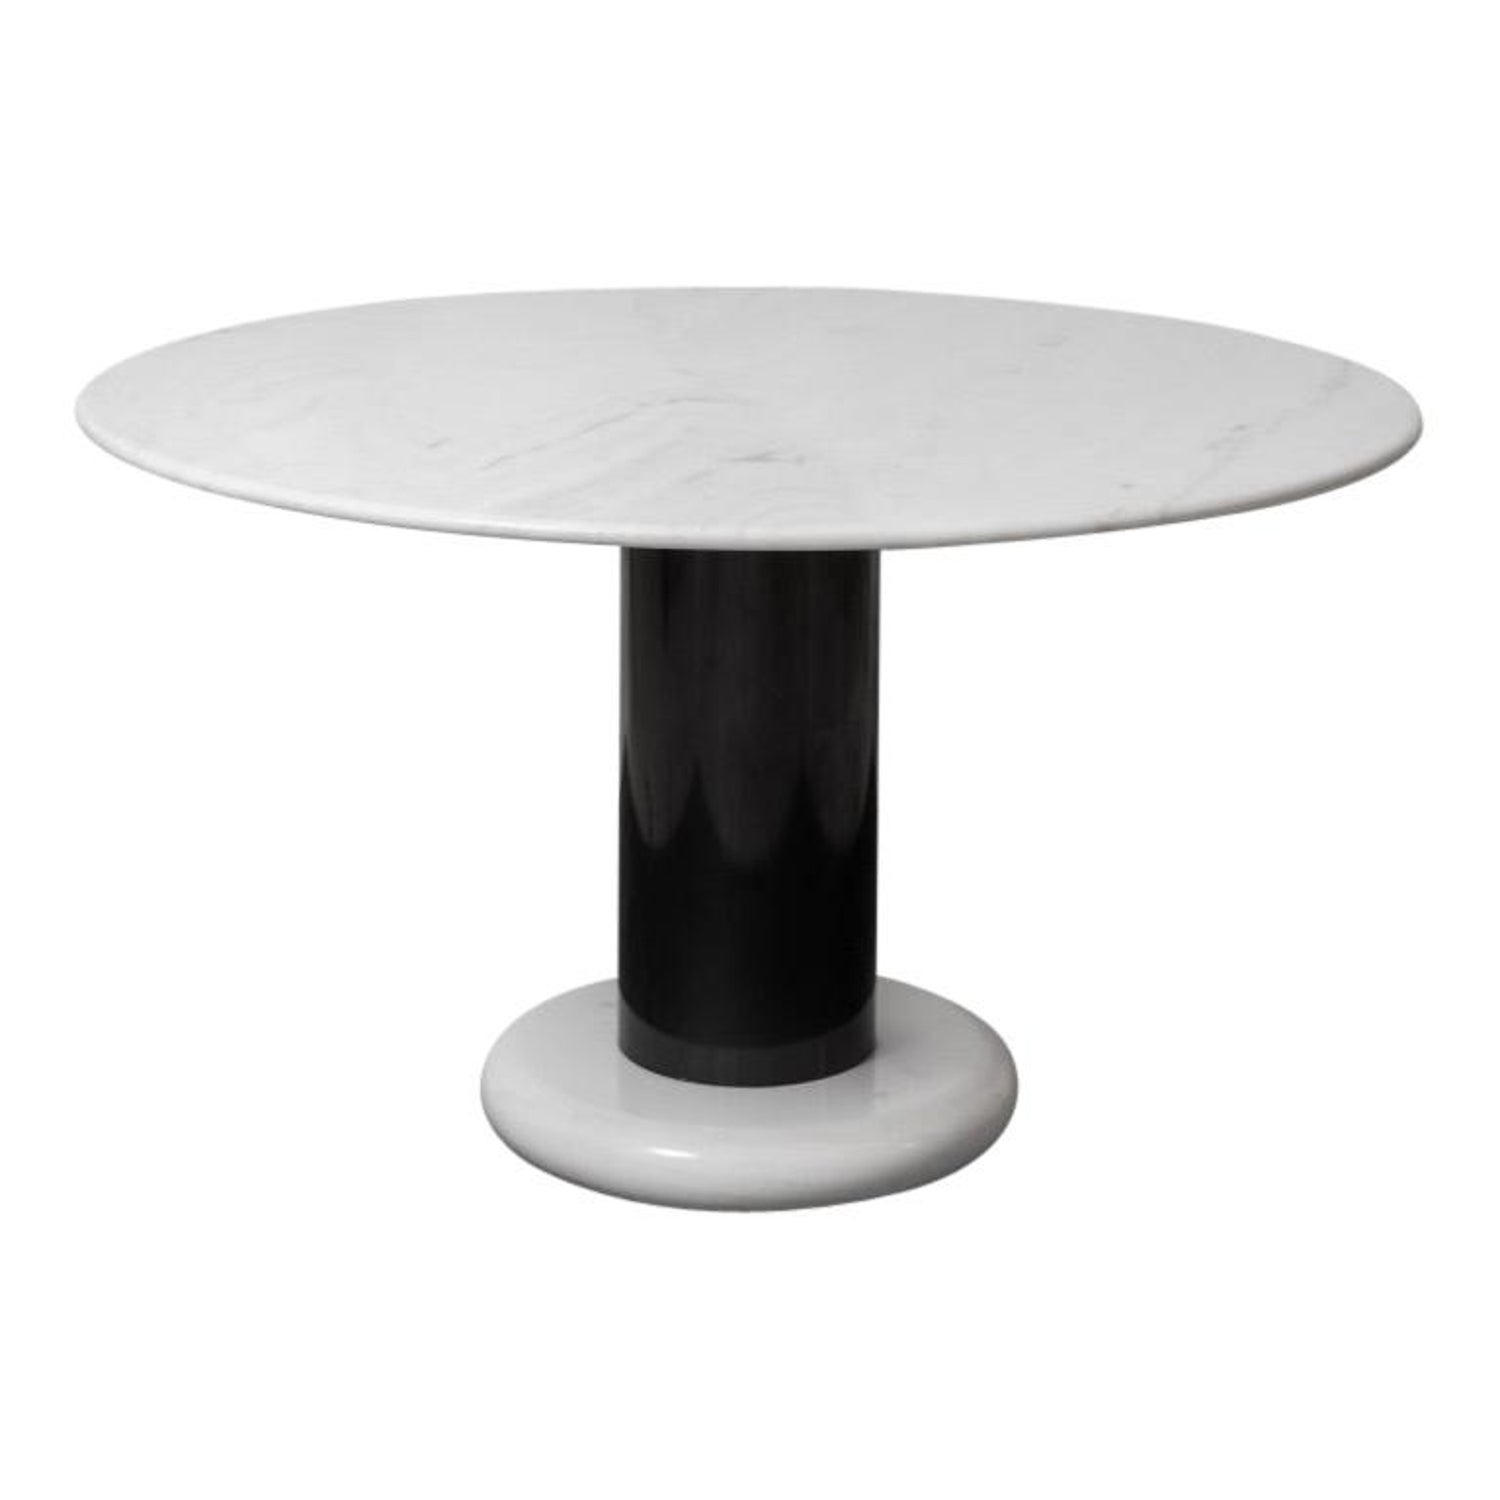 "Lotto Rosso" Table from Ettore Sottsass at 1stDibs